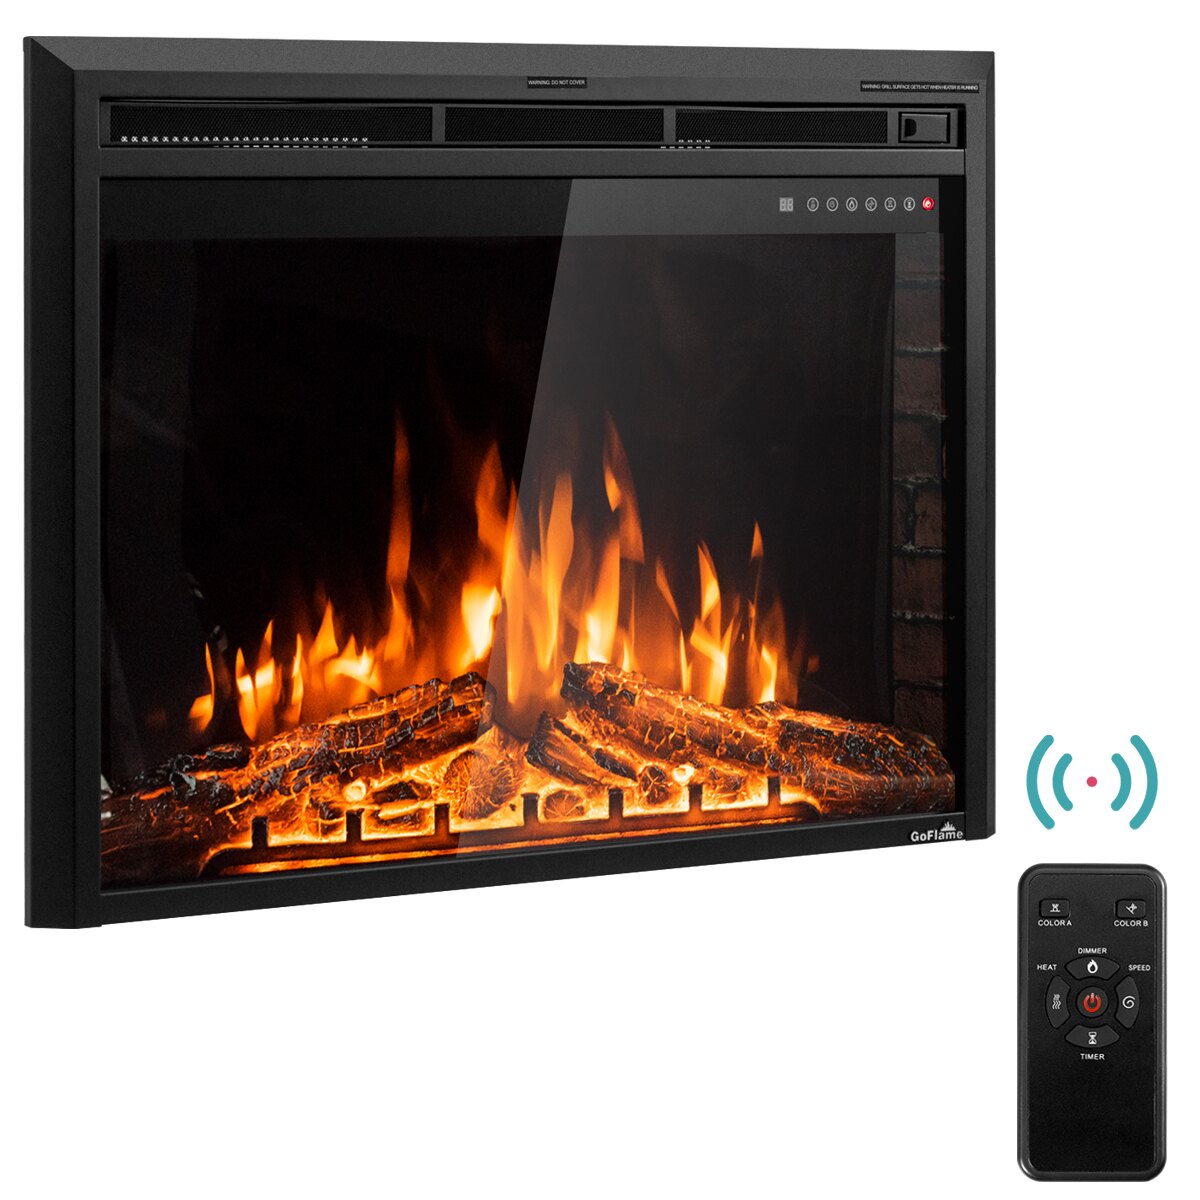 Fake Fireplace Logs Electric Fresh Goflame 36 750w 1500w Fireplace Heater Electric Embedded Insert Timer Flame Remote